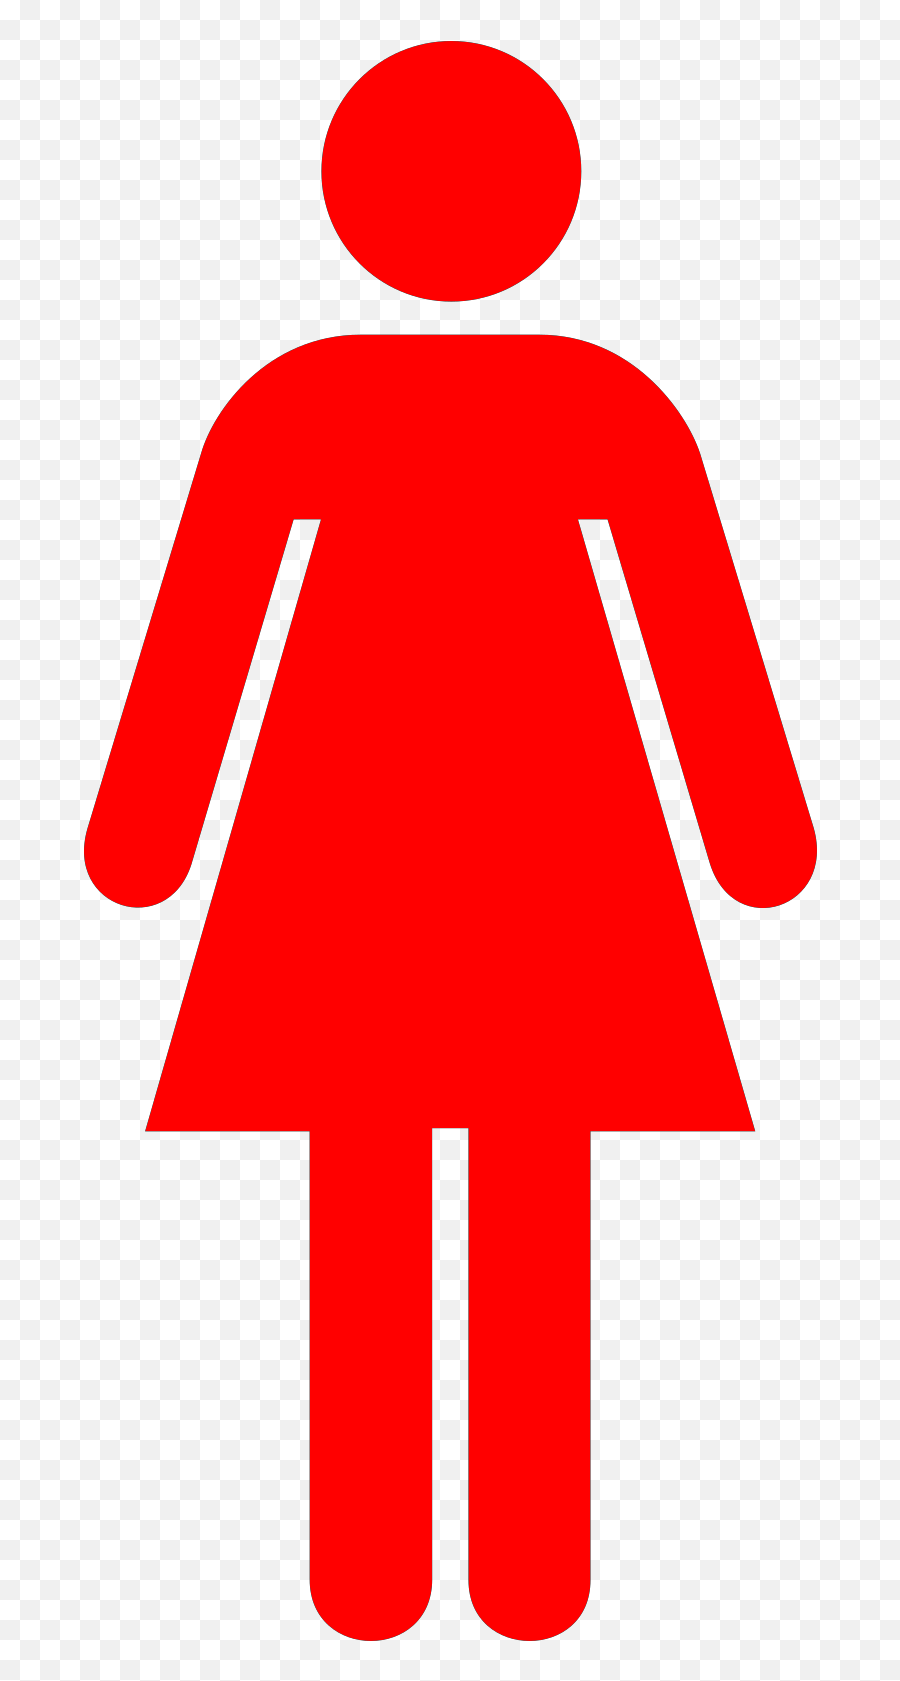 Red Woman Svg Vector Red Woman Clip Art - Svg Clipart Male And Female Toilet Signs Emoji,Female Clipart